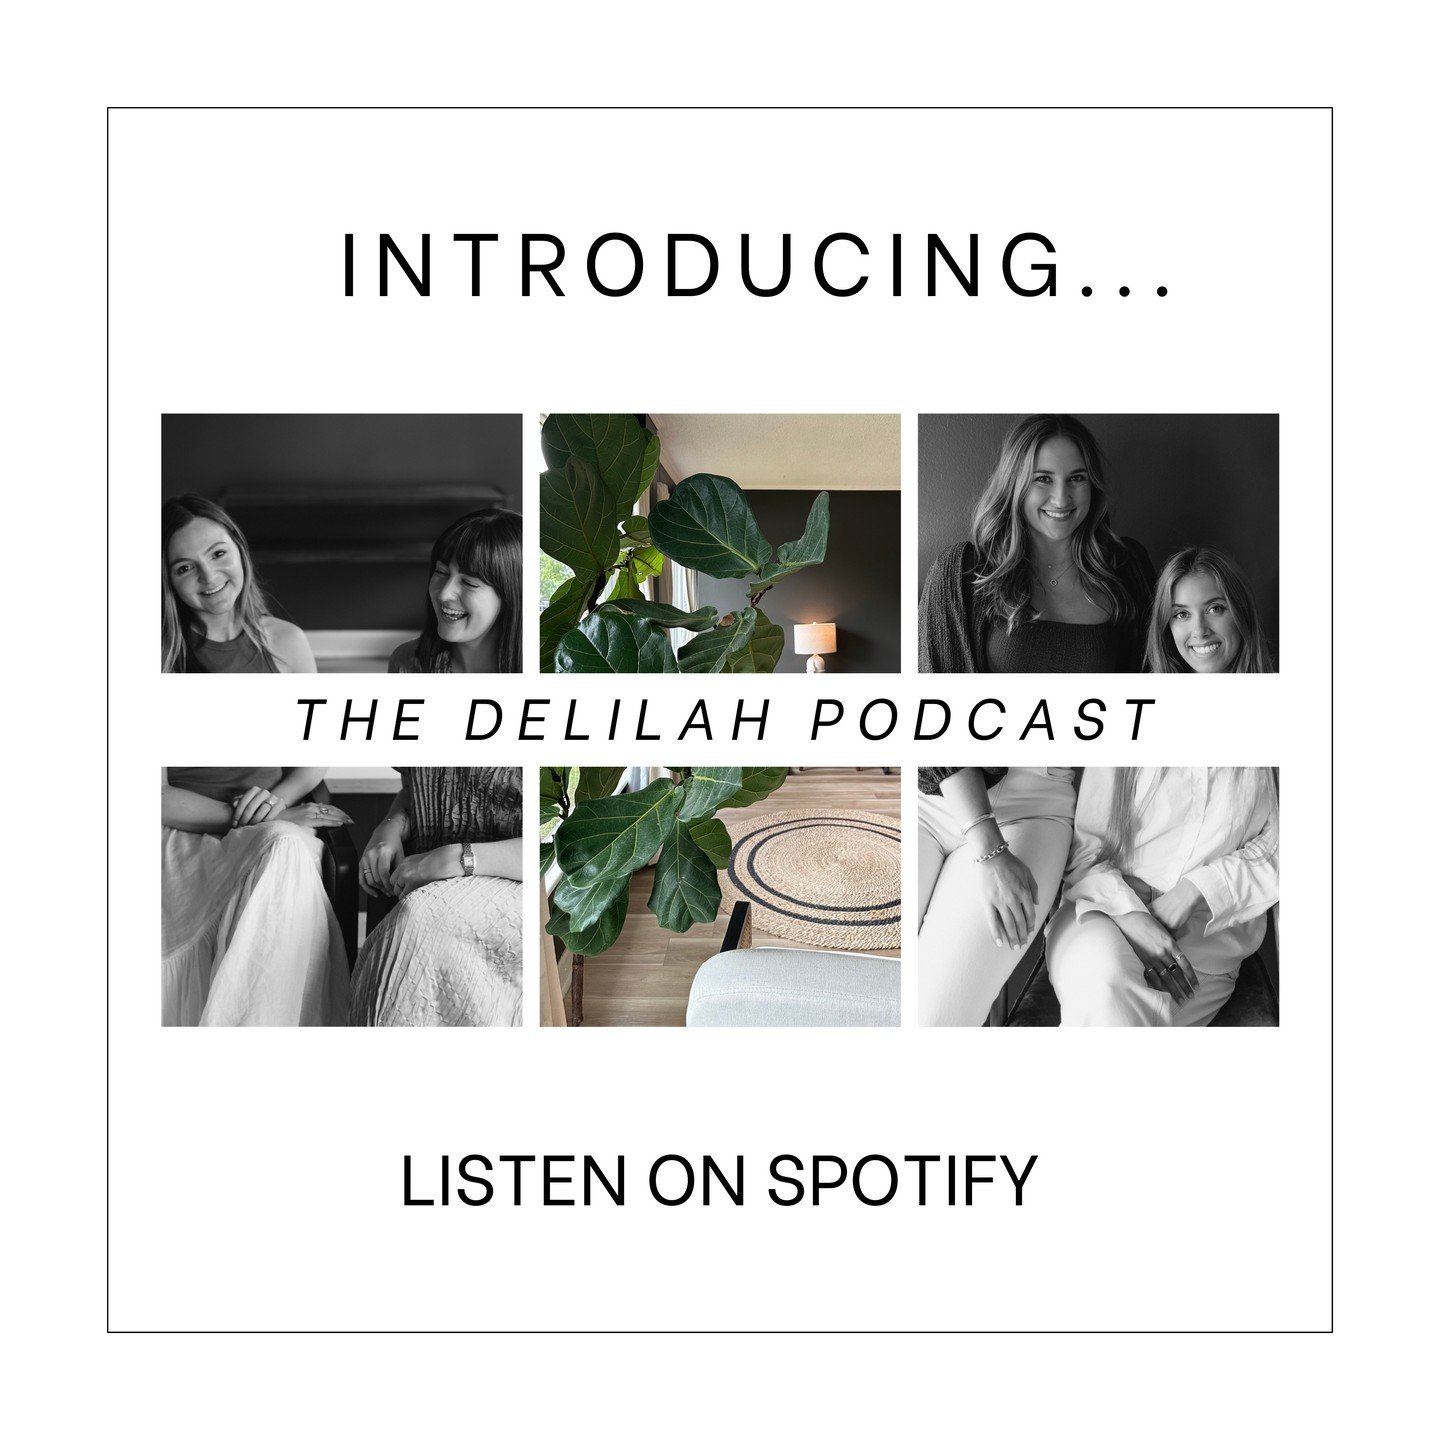 ✨ IT'S FINALLY HERE! ✨ Introducing the Delilah Counseling Podcast. Our first episode is live and available on Spotify! Jillian and Olivia sit down to chat with Dr. Nadine Macaluso about her new book, Run Like Hell. Stay tuned for more episodes to com